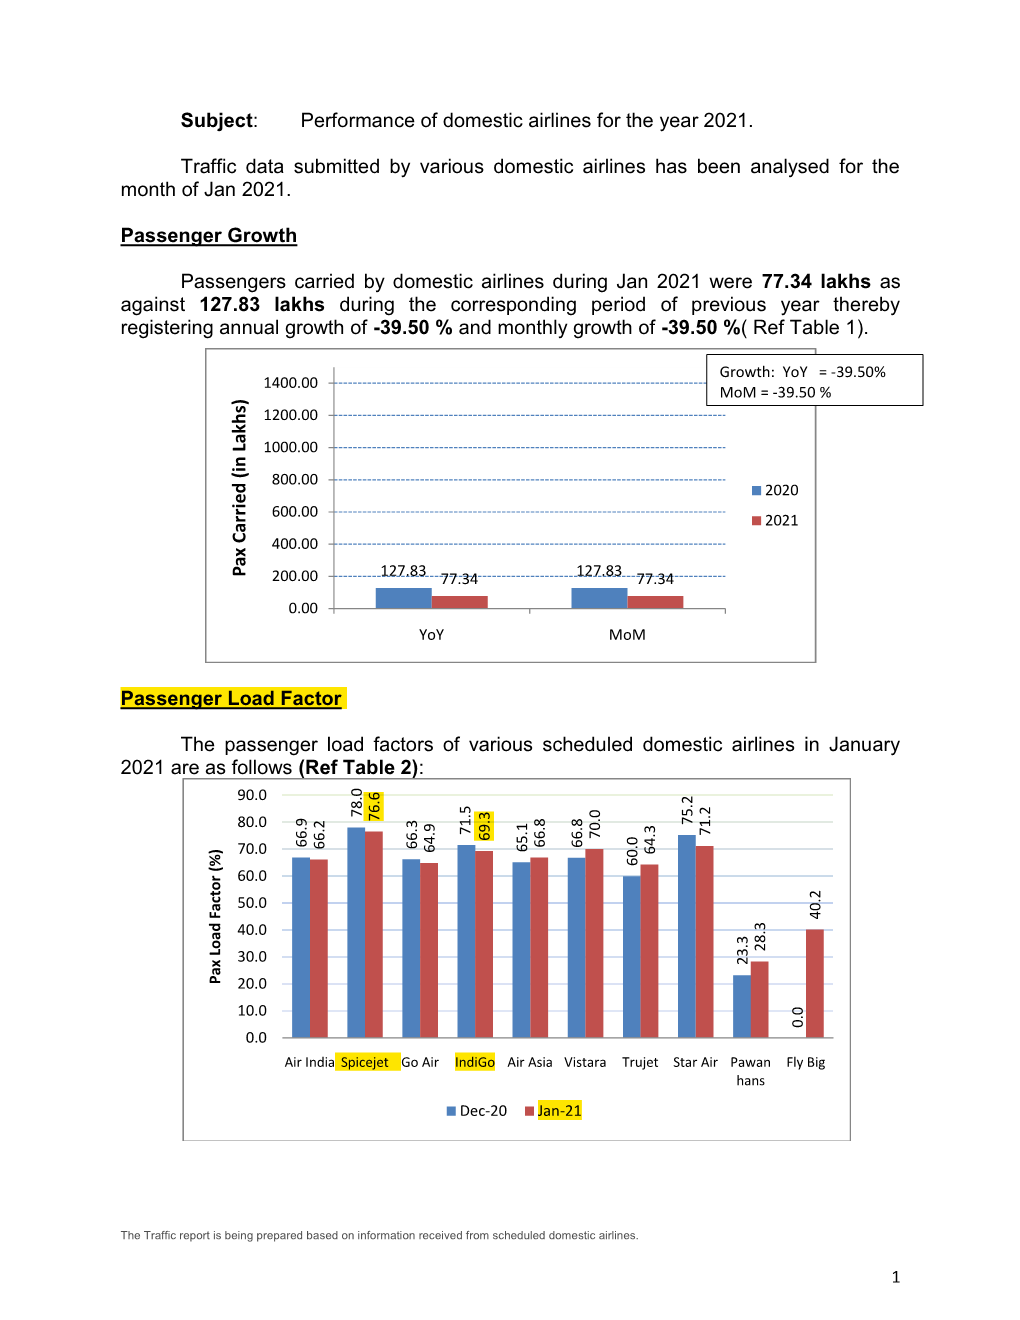 Performance of Domestic Airlines for the Year 2021. Traffic Data Submitted by Various Domestic Airlines Has Been Analy